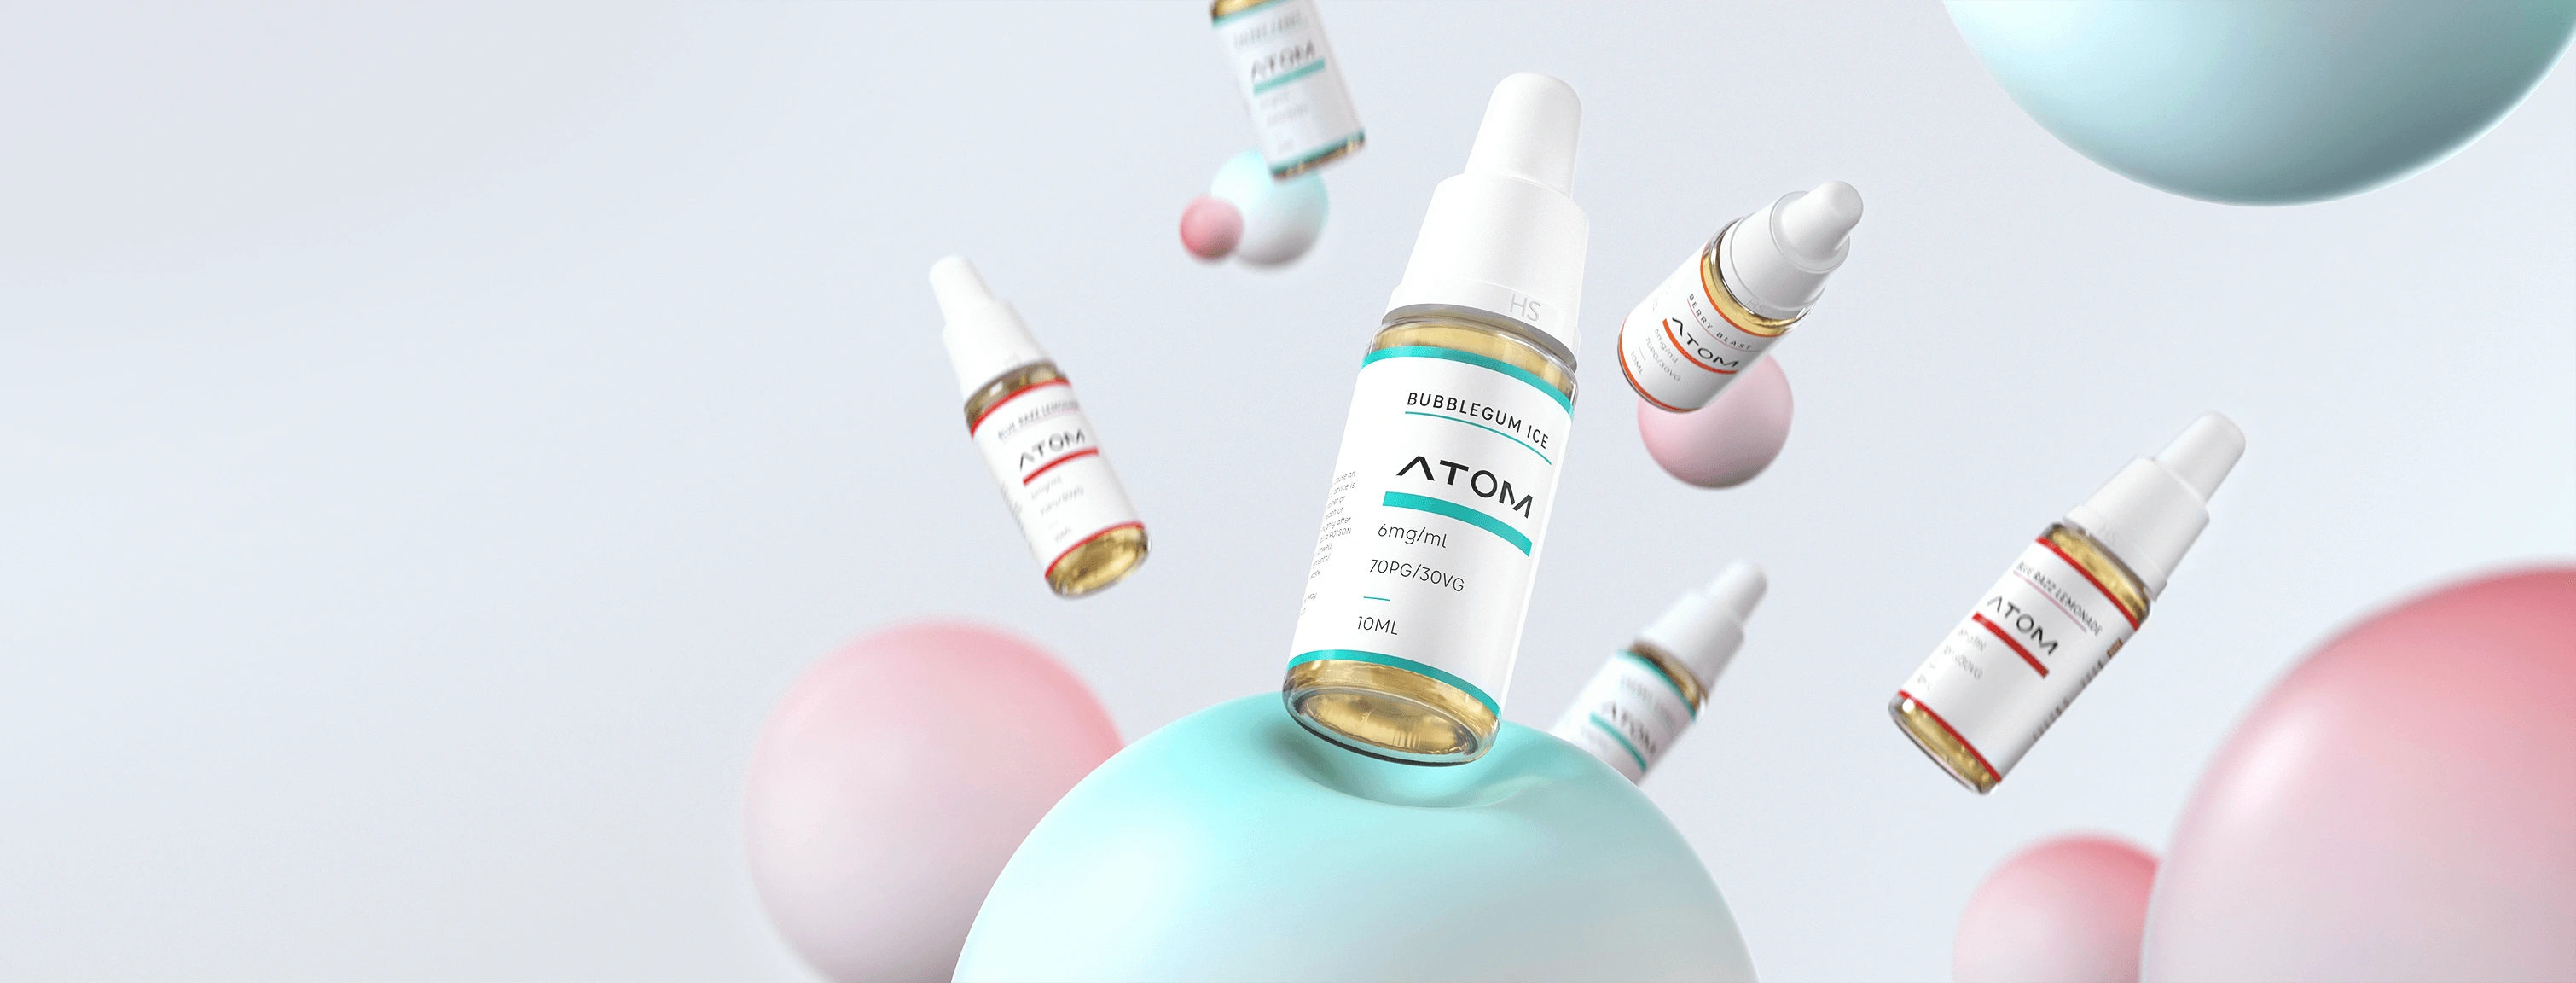 The image displays several e-liquid bottles suspended in mid-air against a light background with soft, out-of-focus orbs in pastel colors. The central bottle is clearly highlighted, with other bottles and orbs surrounding it in a balanced composition.